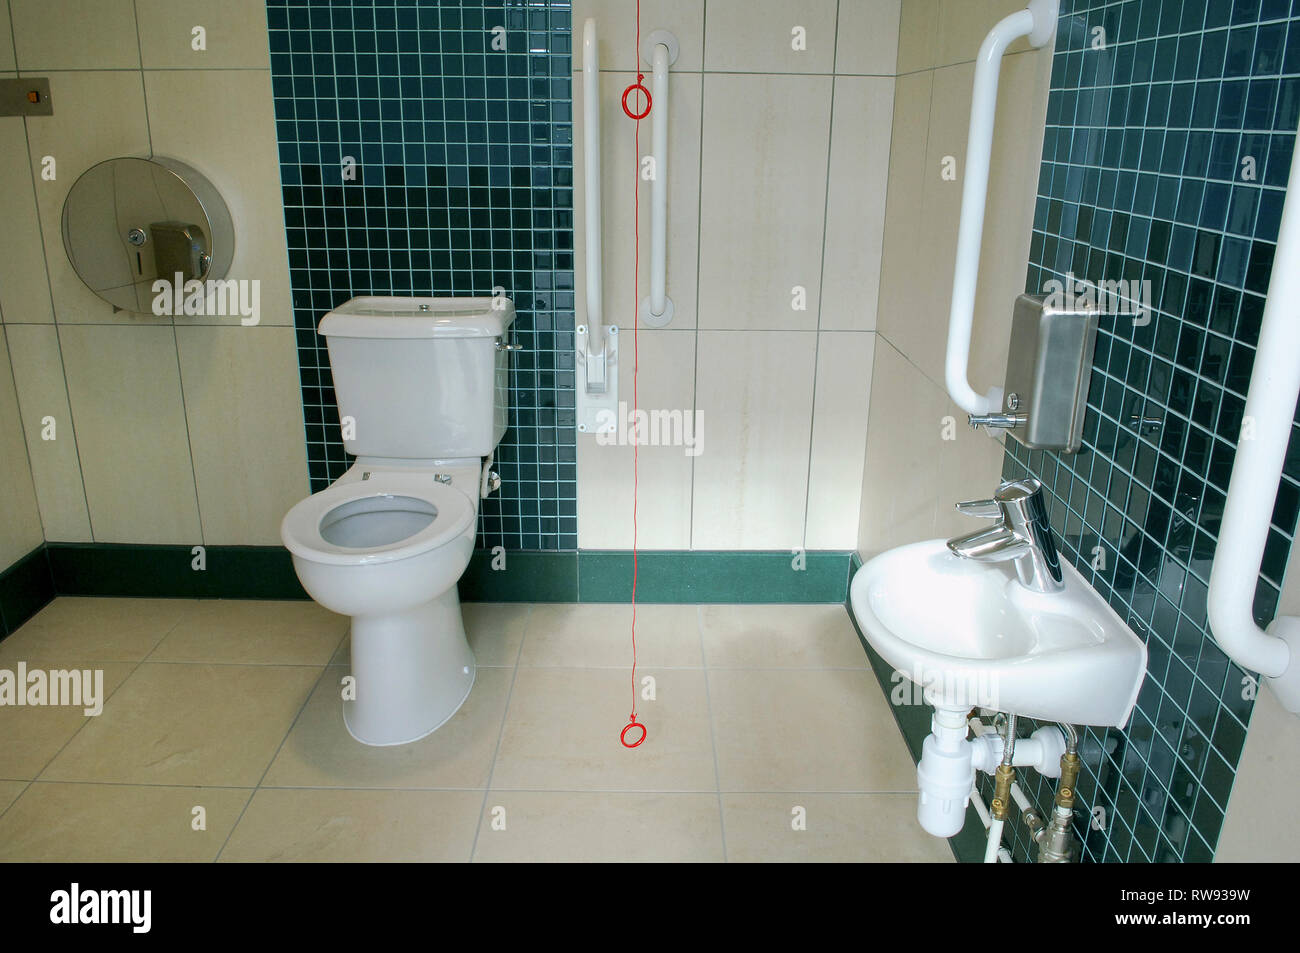 Accessible toilet with hand rails Stock Photo